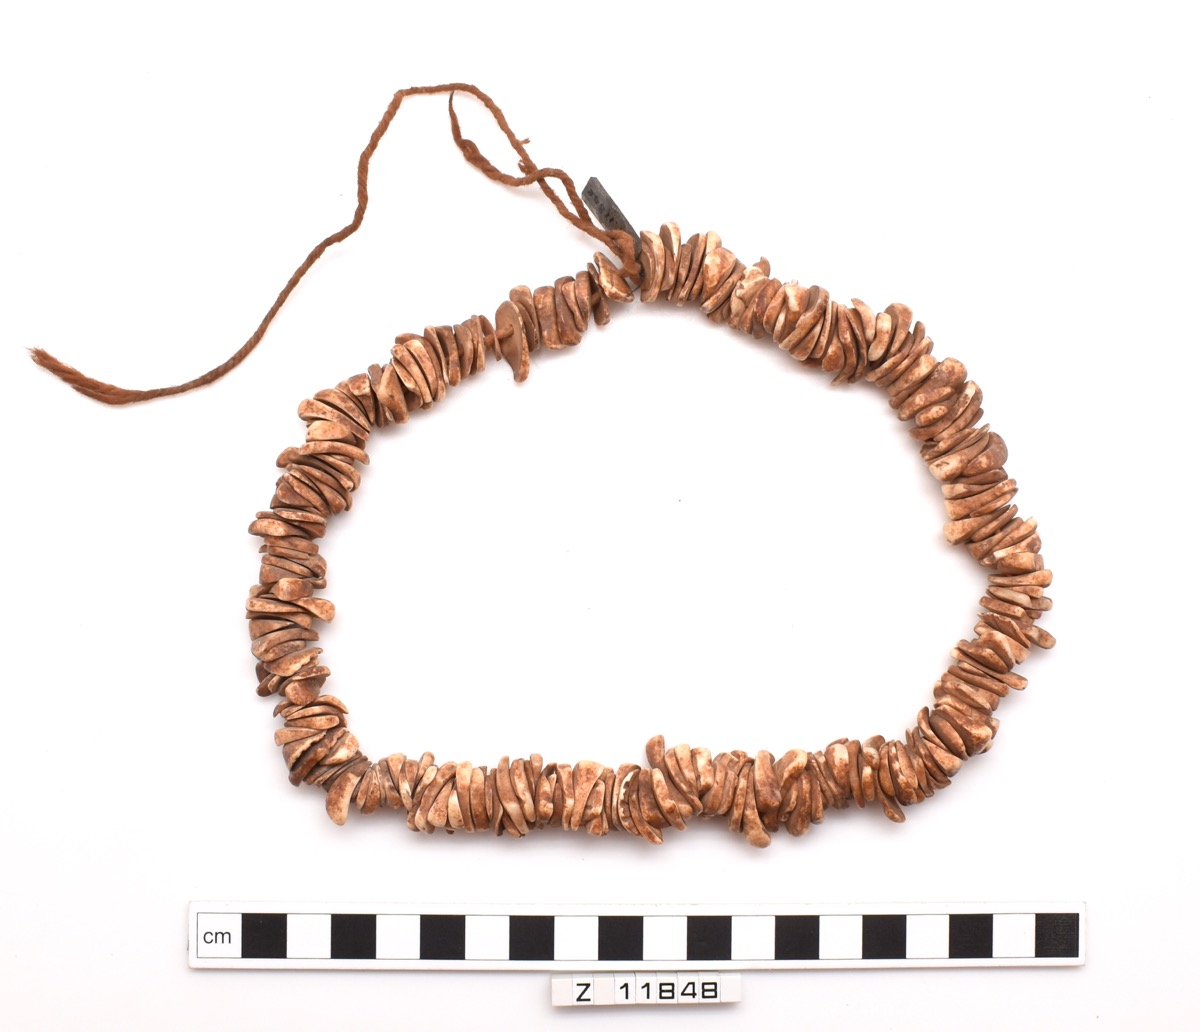 Necklace of 225 shell beads, a brown-orange in colour. Irregularly shaped pieces of shell with a drilled hole strung onto a length of cotton.